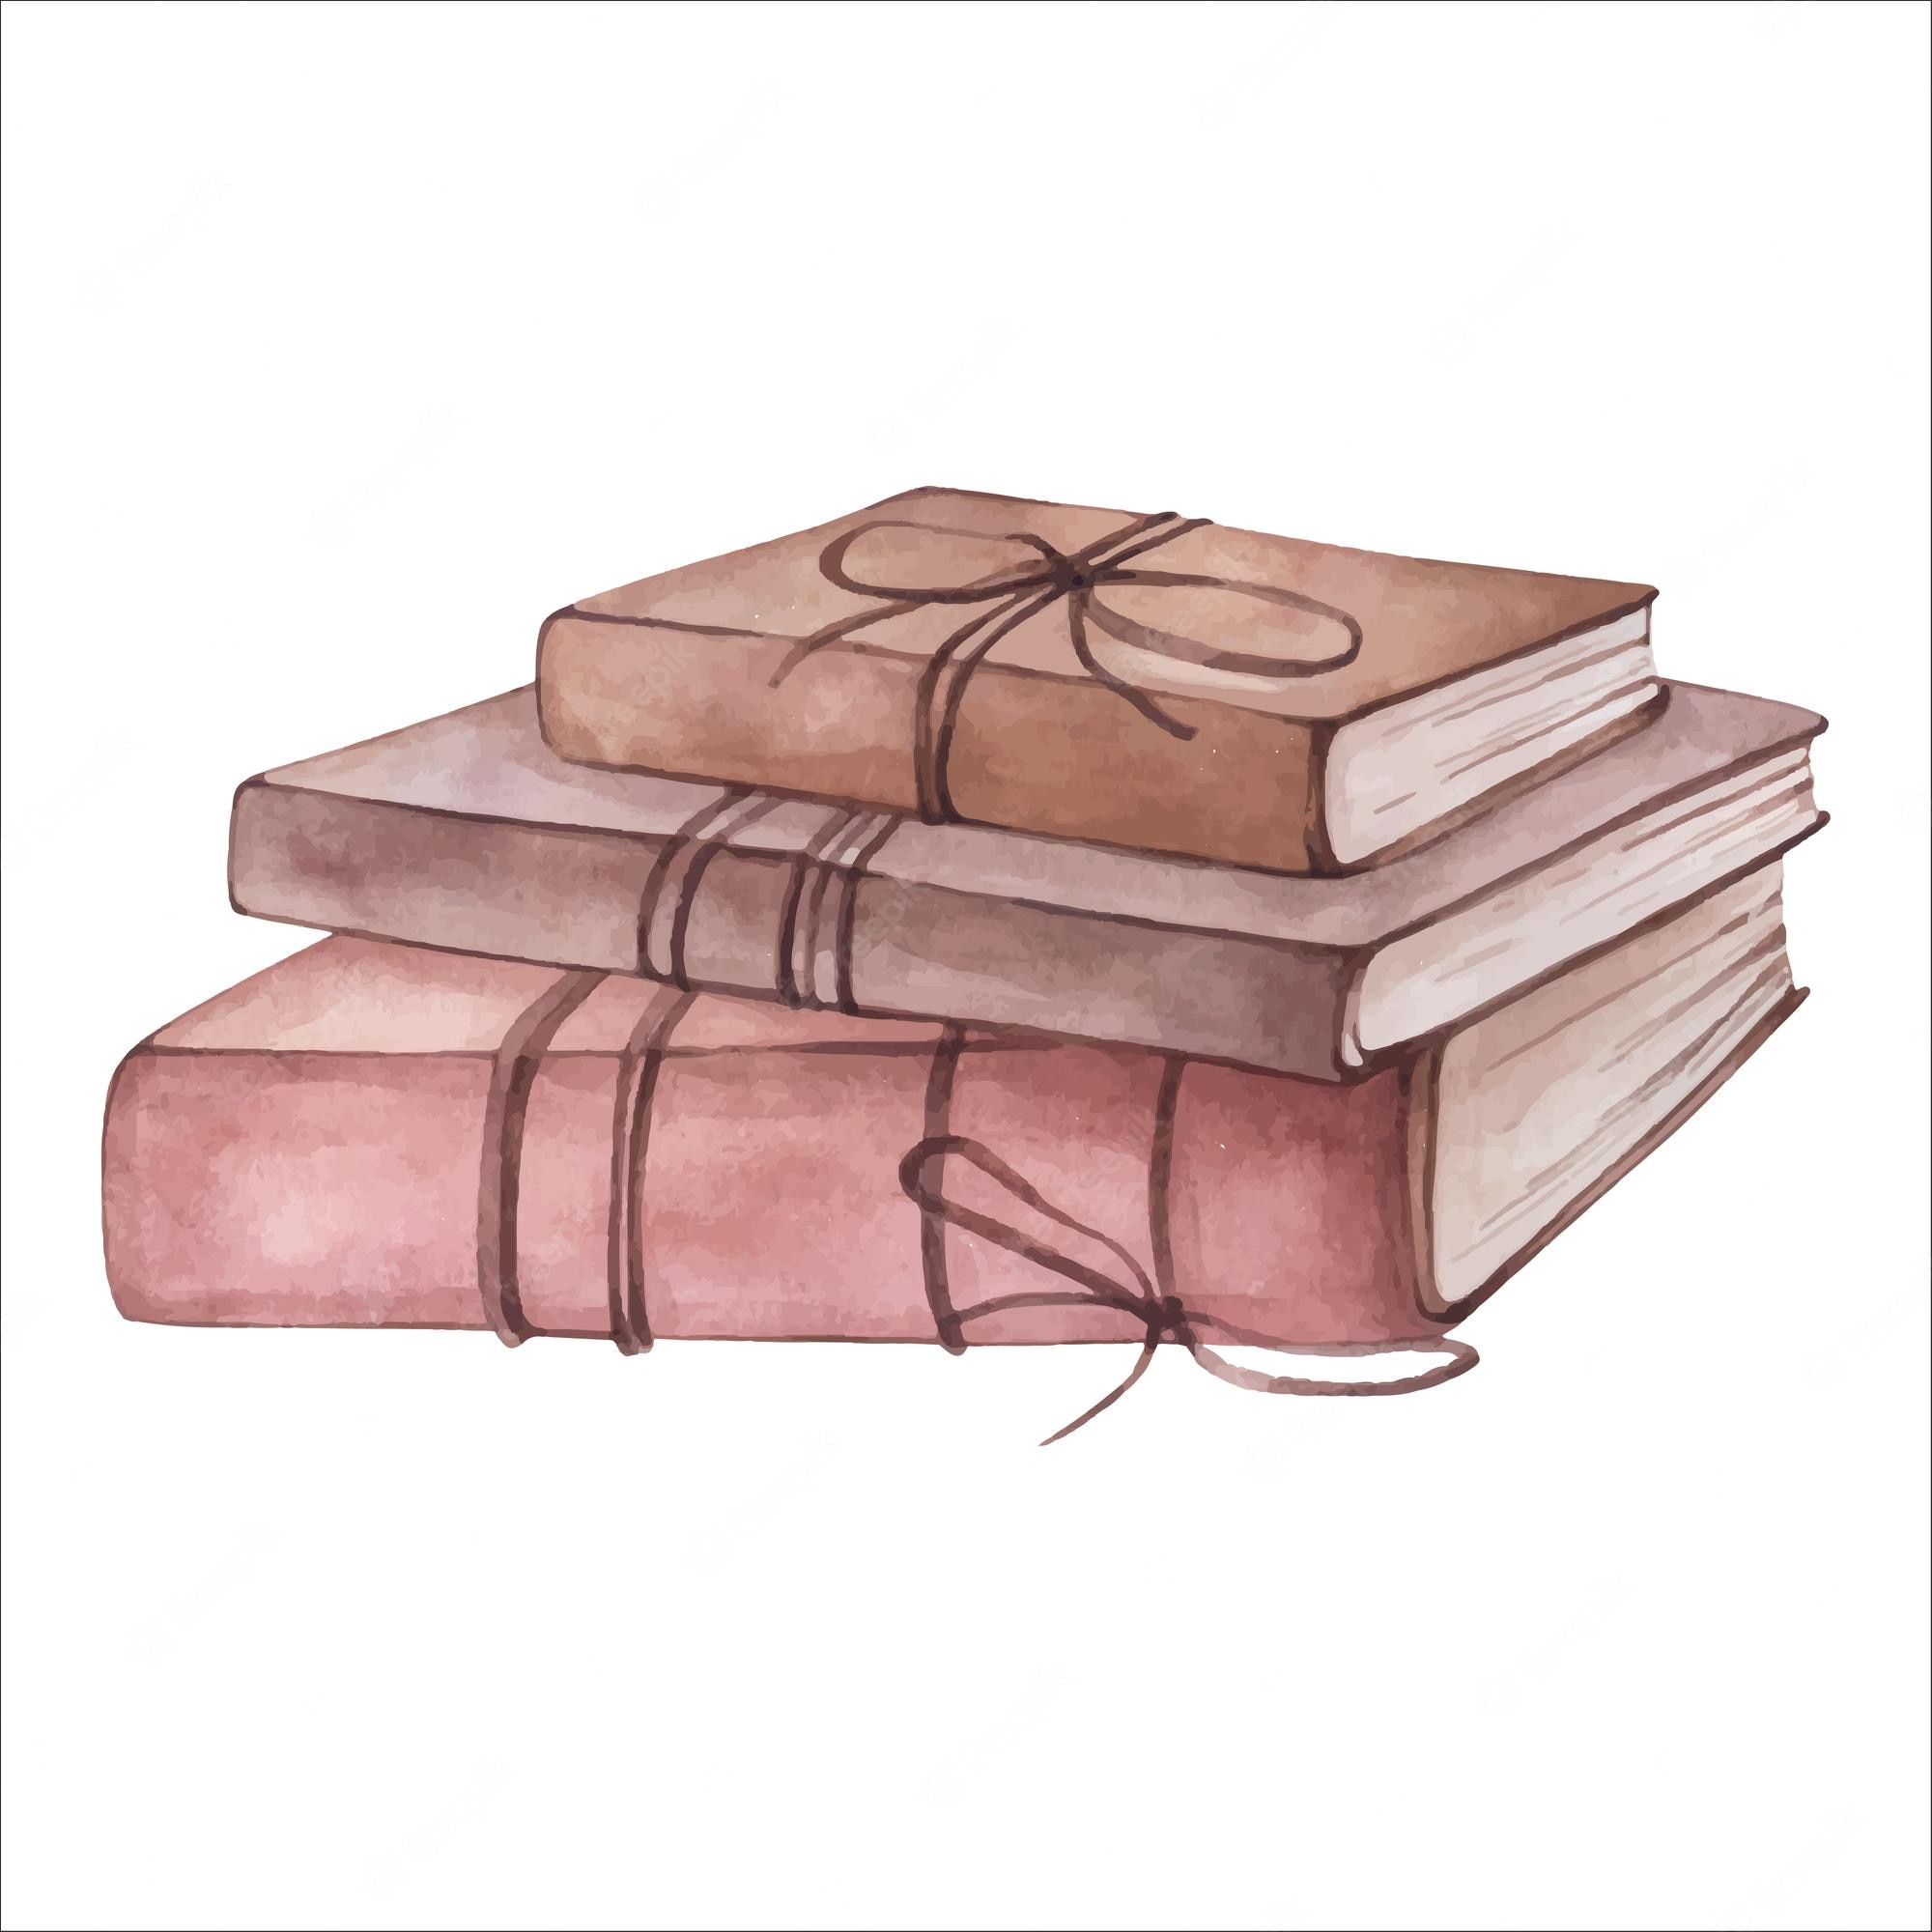 piles of books clipart pictures